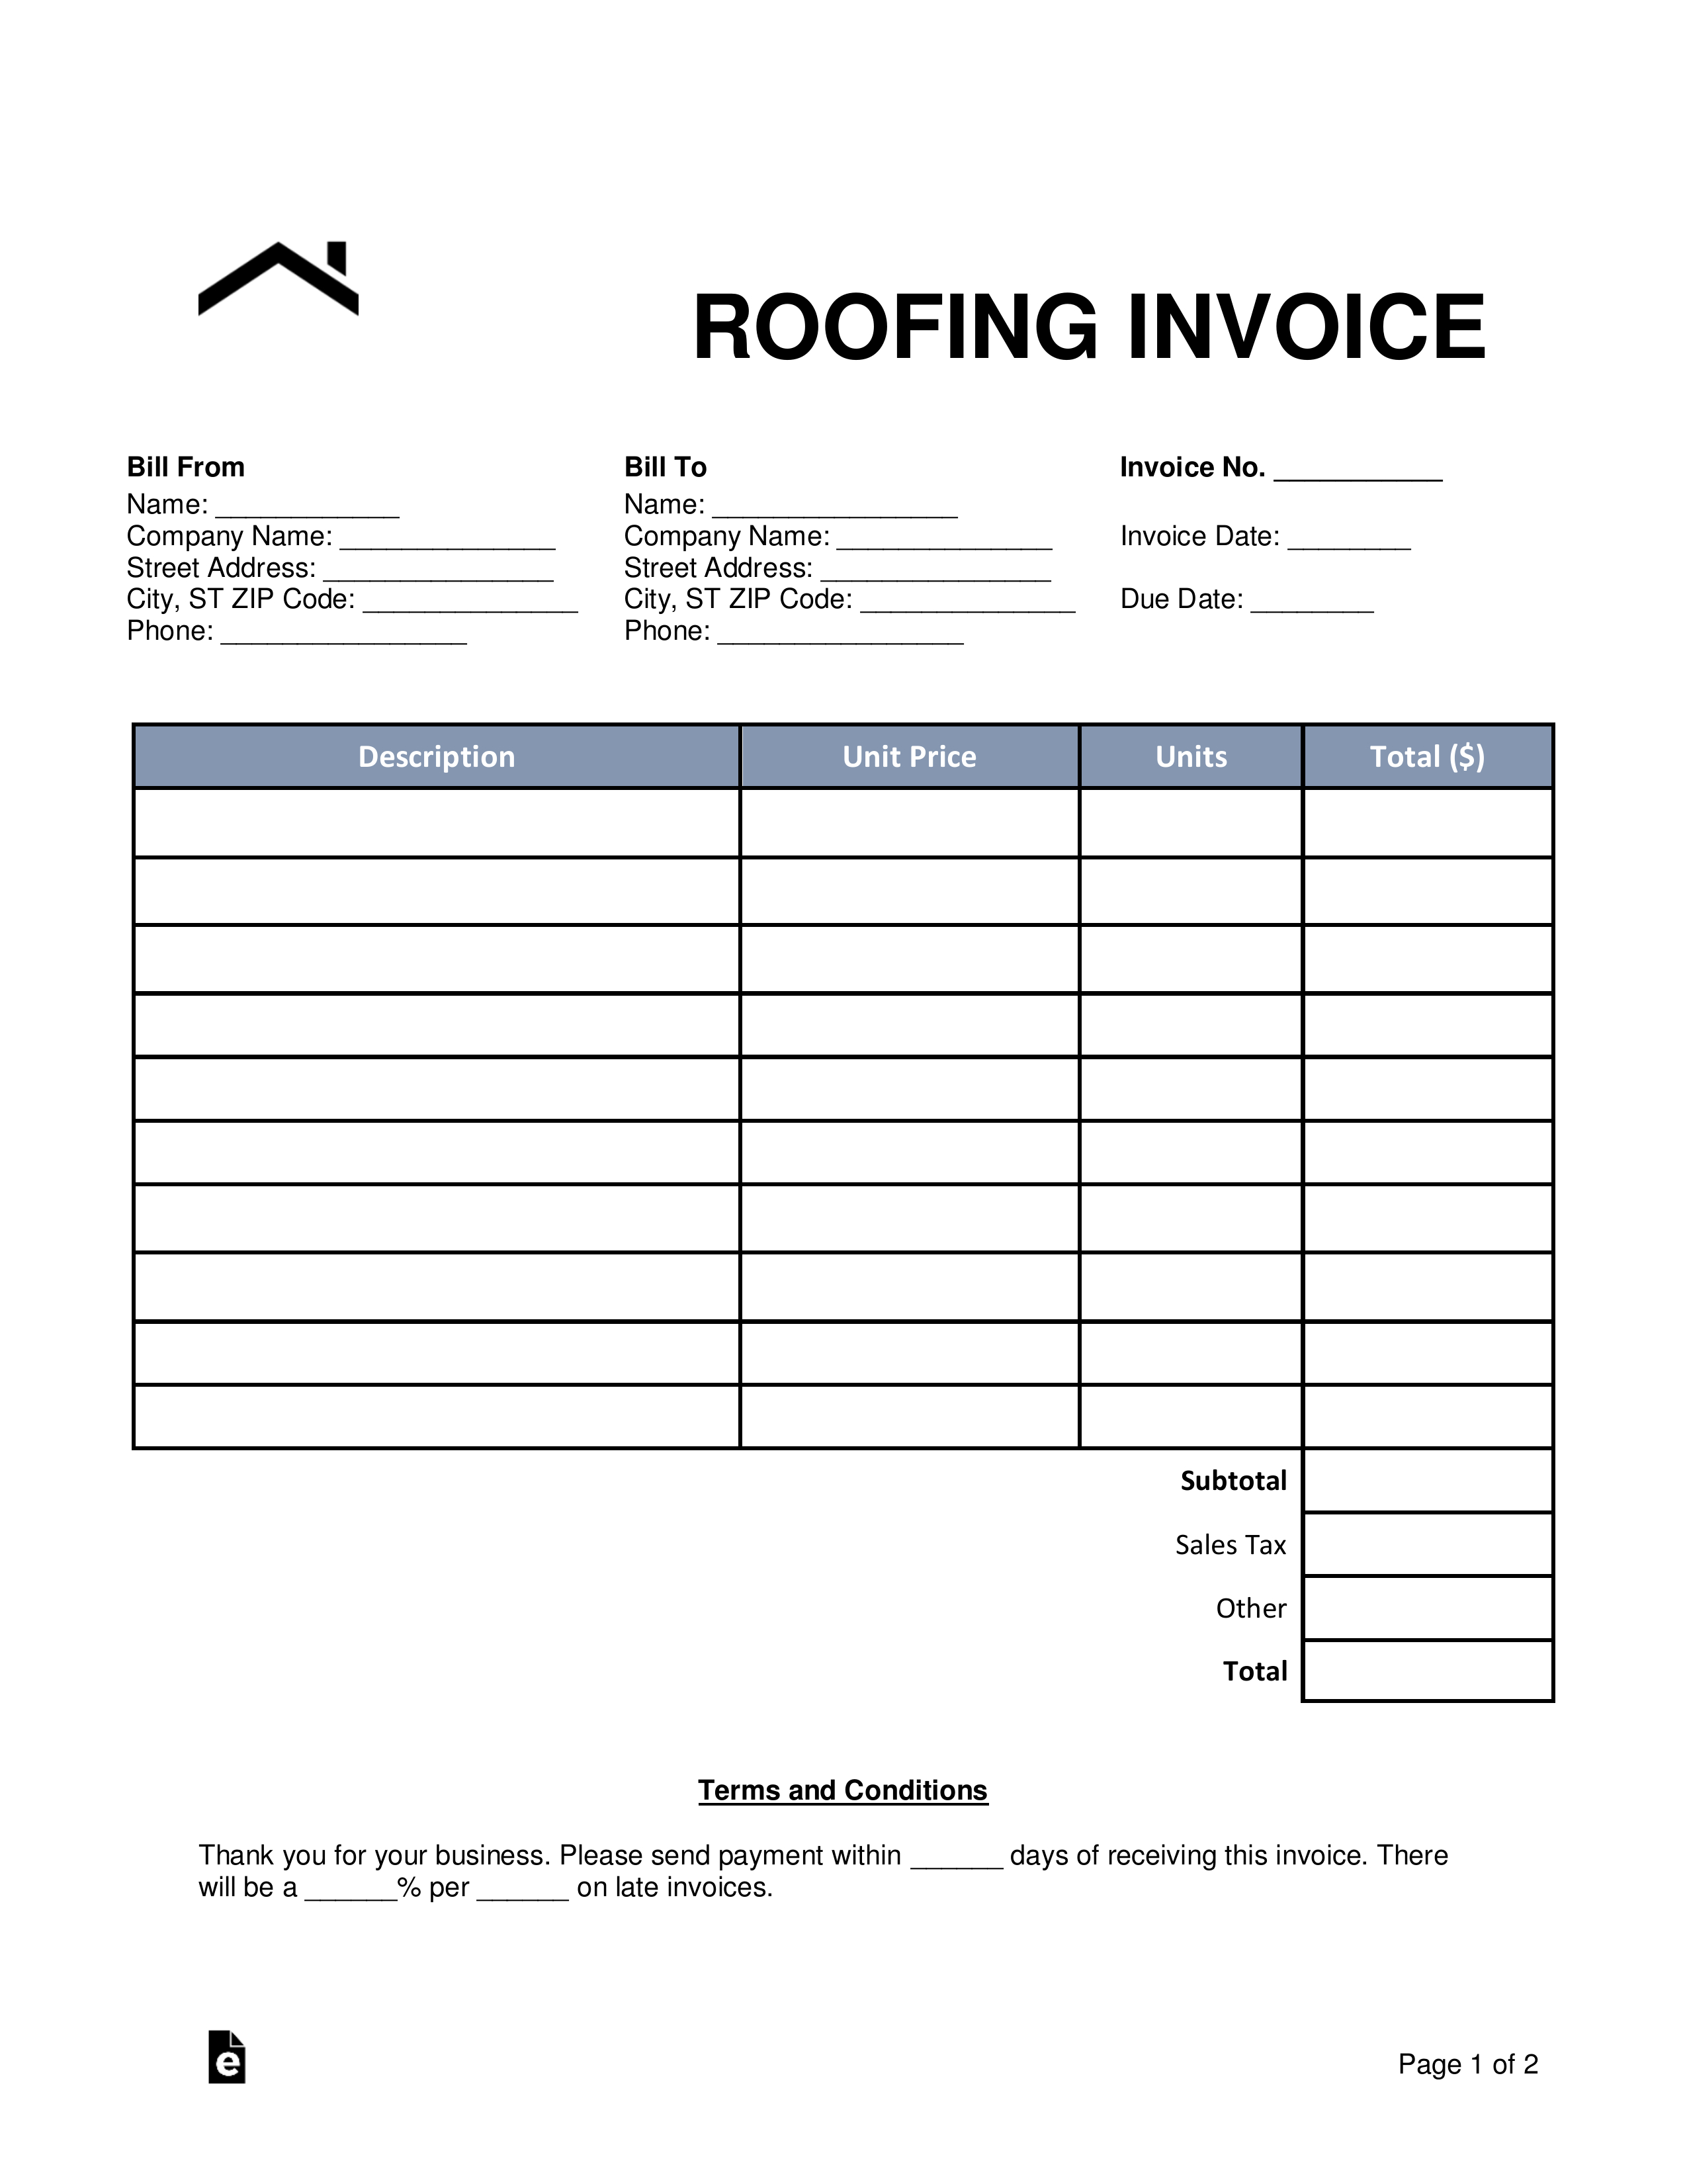 Free Roofing Invoice Template - Word | Pdf | Eforms – Free for Free Roofing Invoice Template